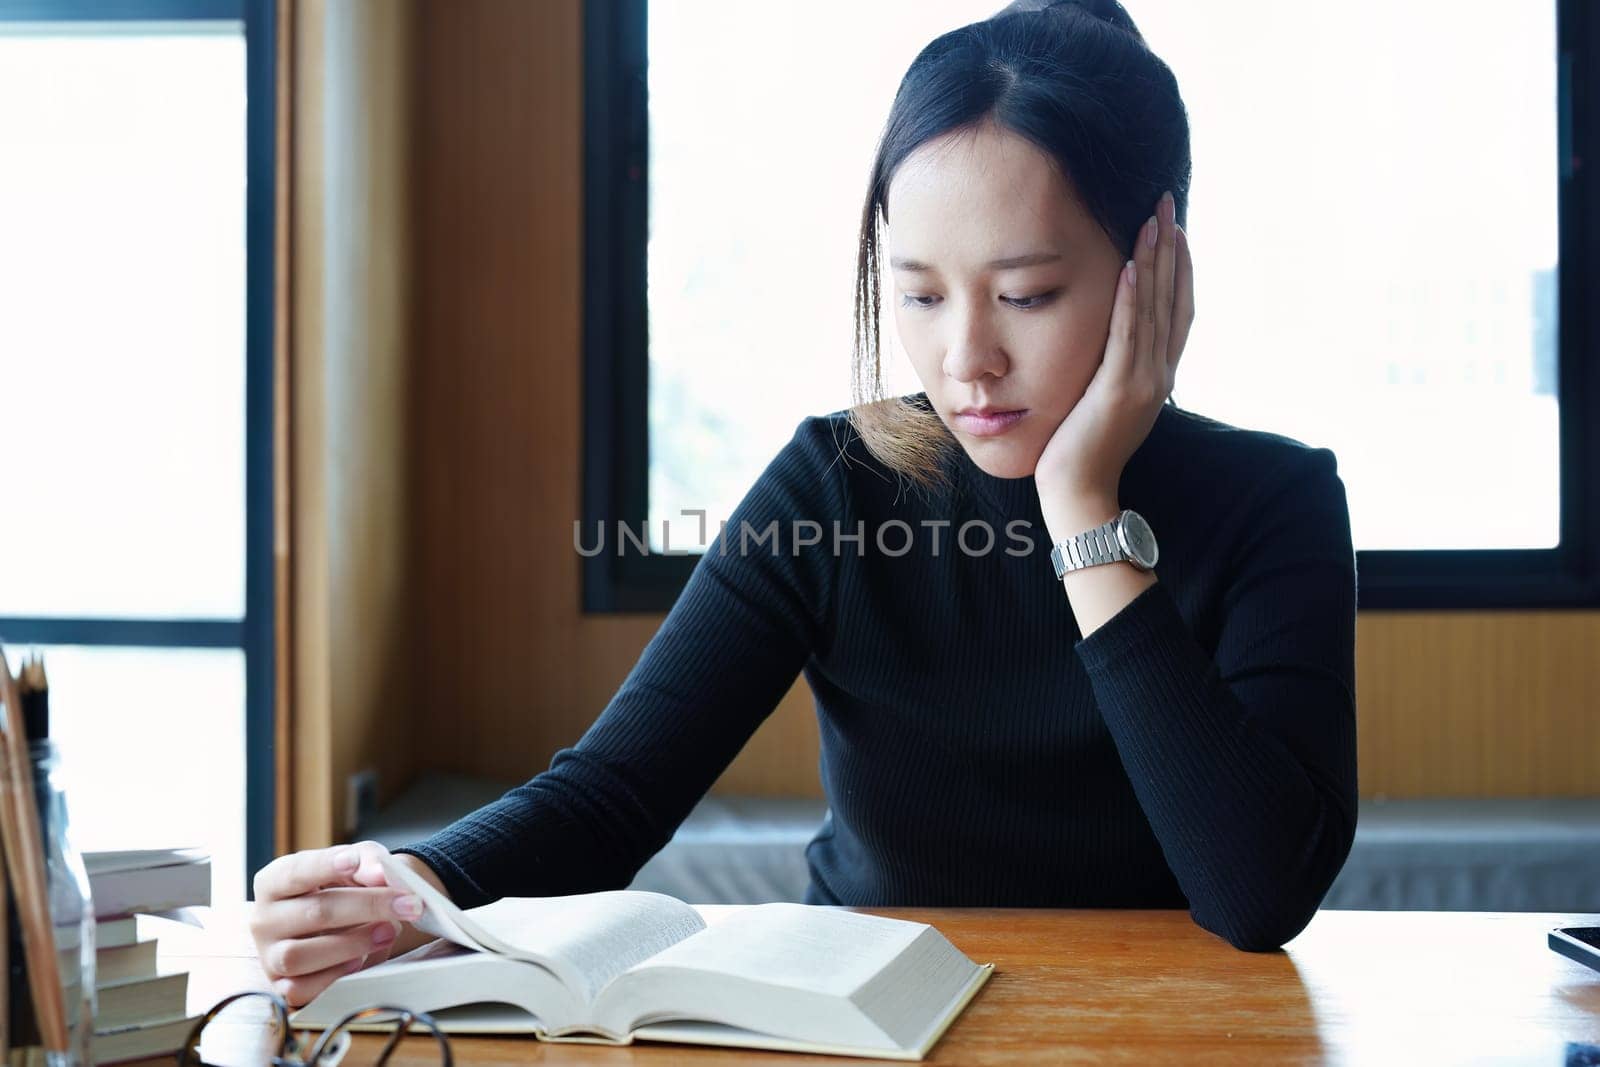 A portrait of a young Asian woman reading textbooks shows boredom on a wooden desk in library..